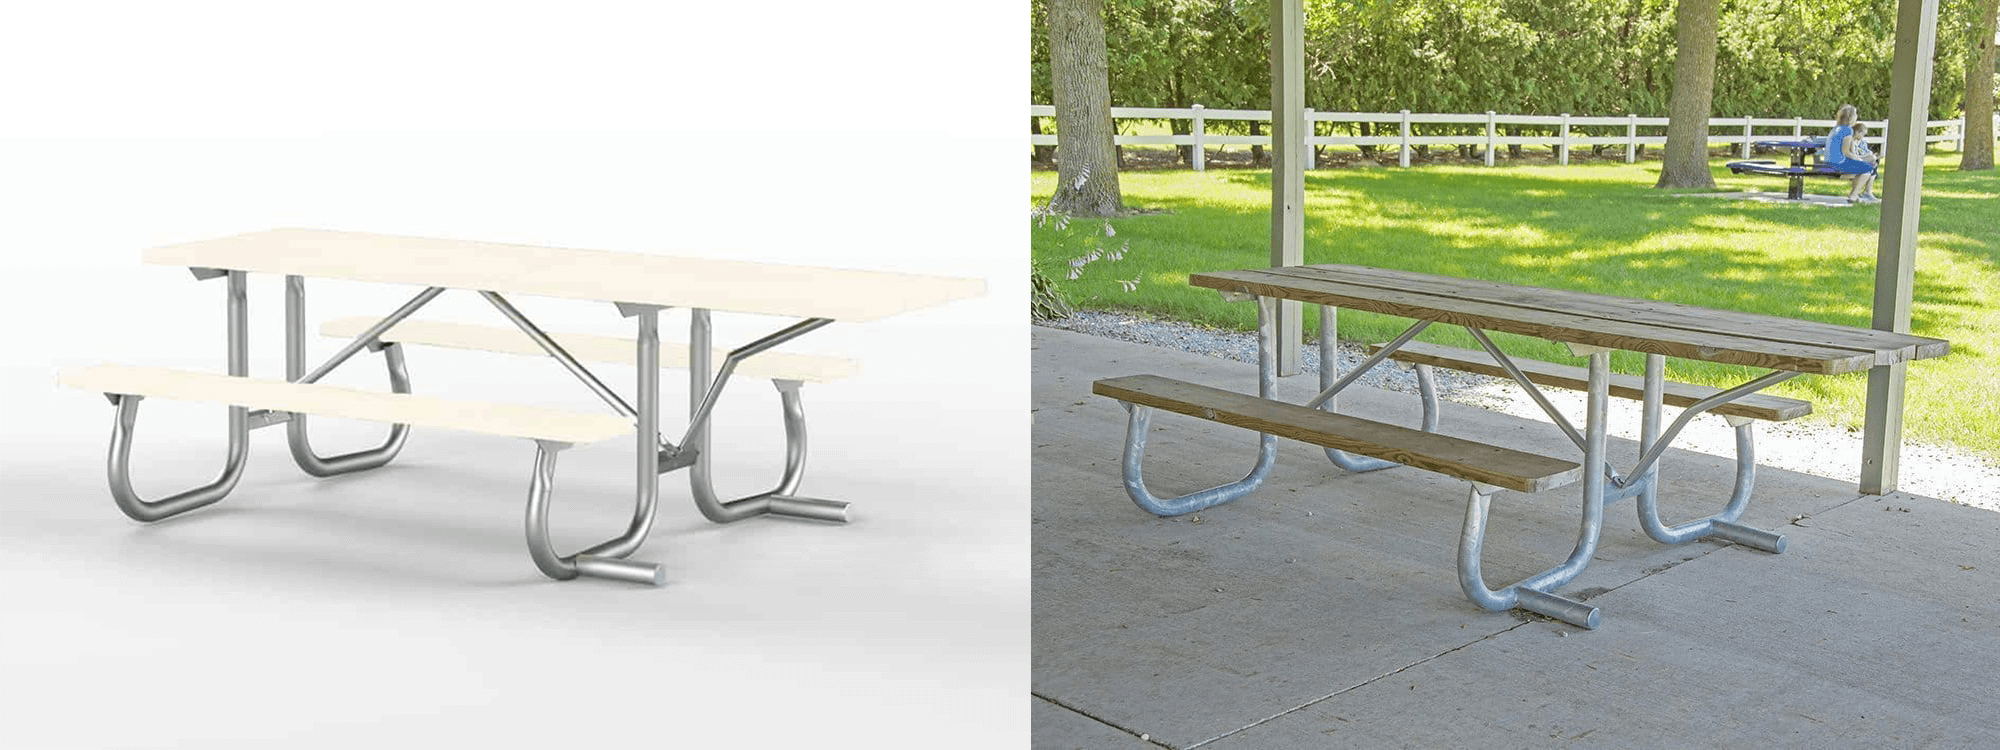 Versatile Sizes and Styles - Advantages of Using Steel Picnic Table Frame Kits